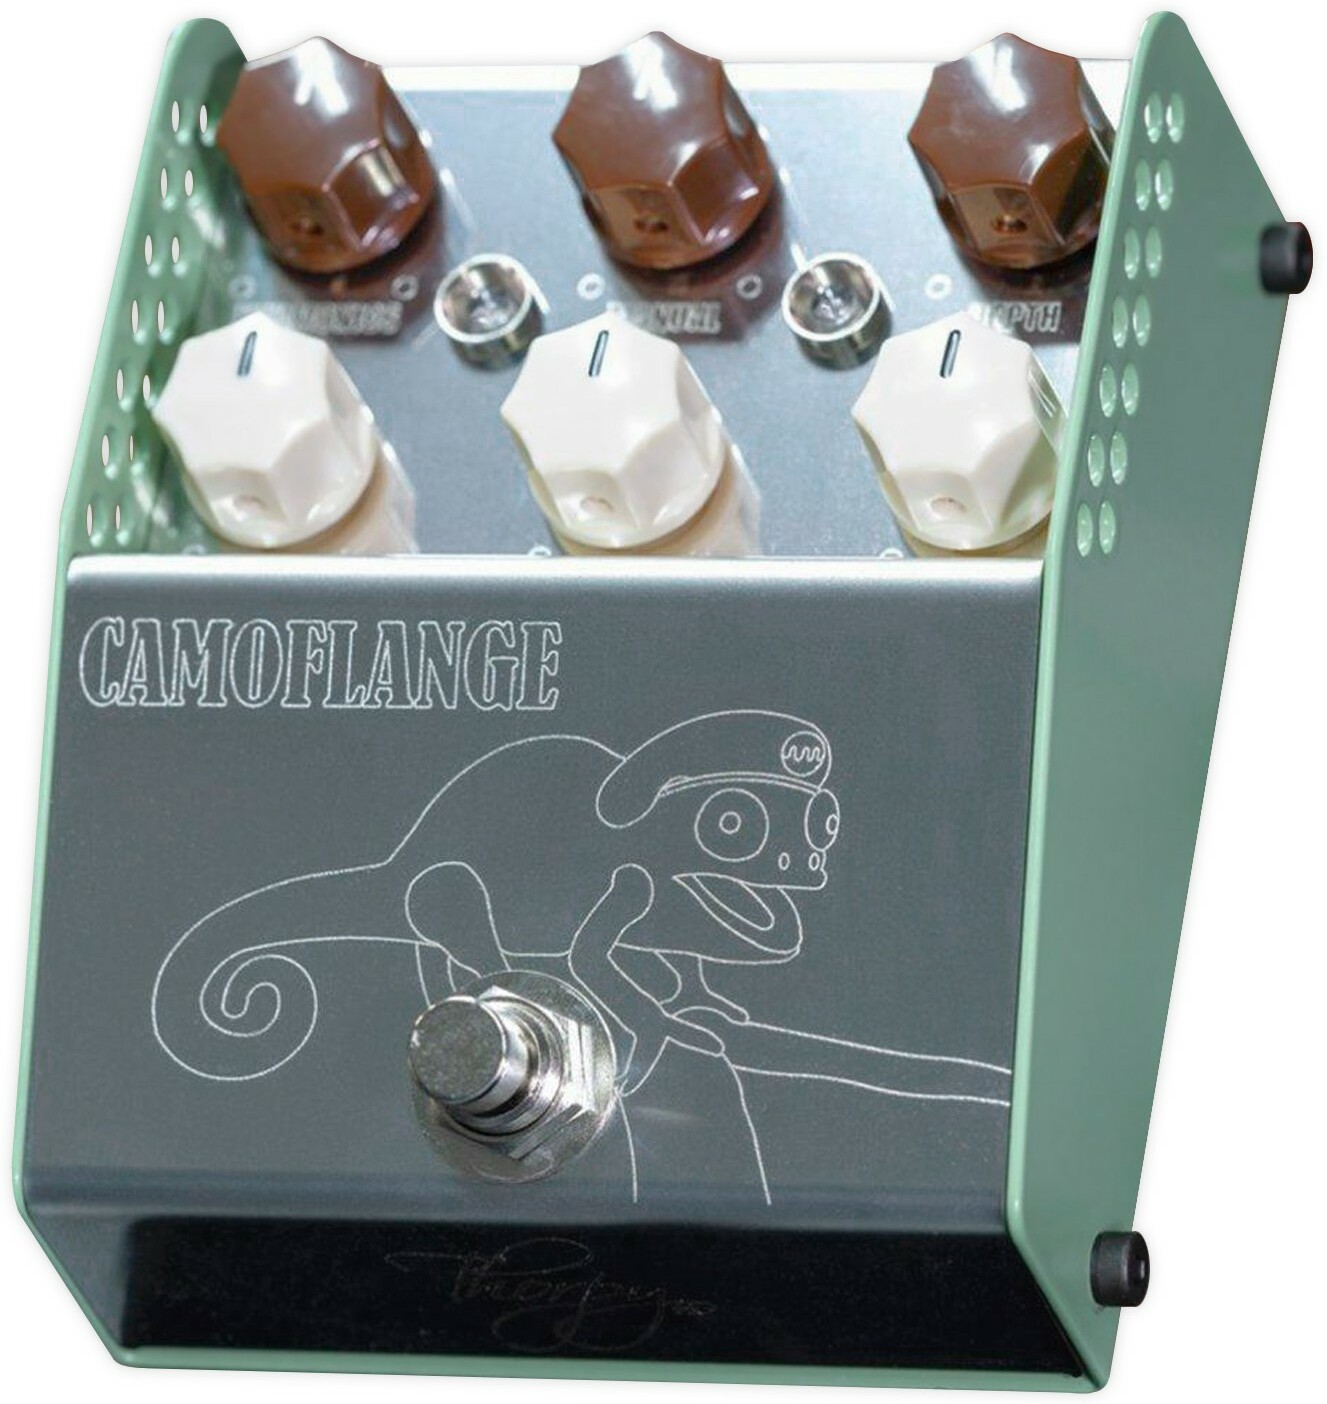 Thorpyfx Camoflange Flanger - Modulation, chorus, flanger, phaser & tremolo effect pedal - Main picture